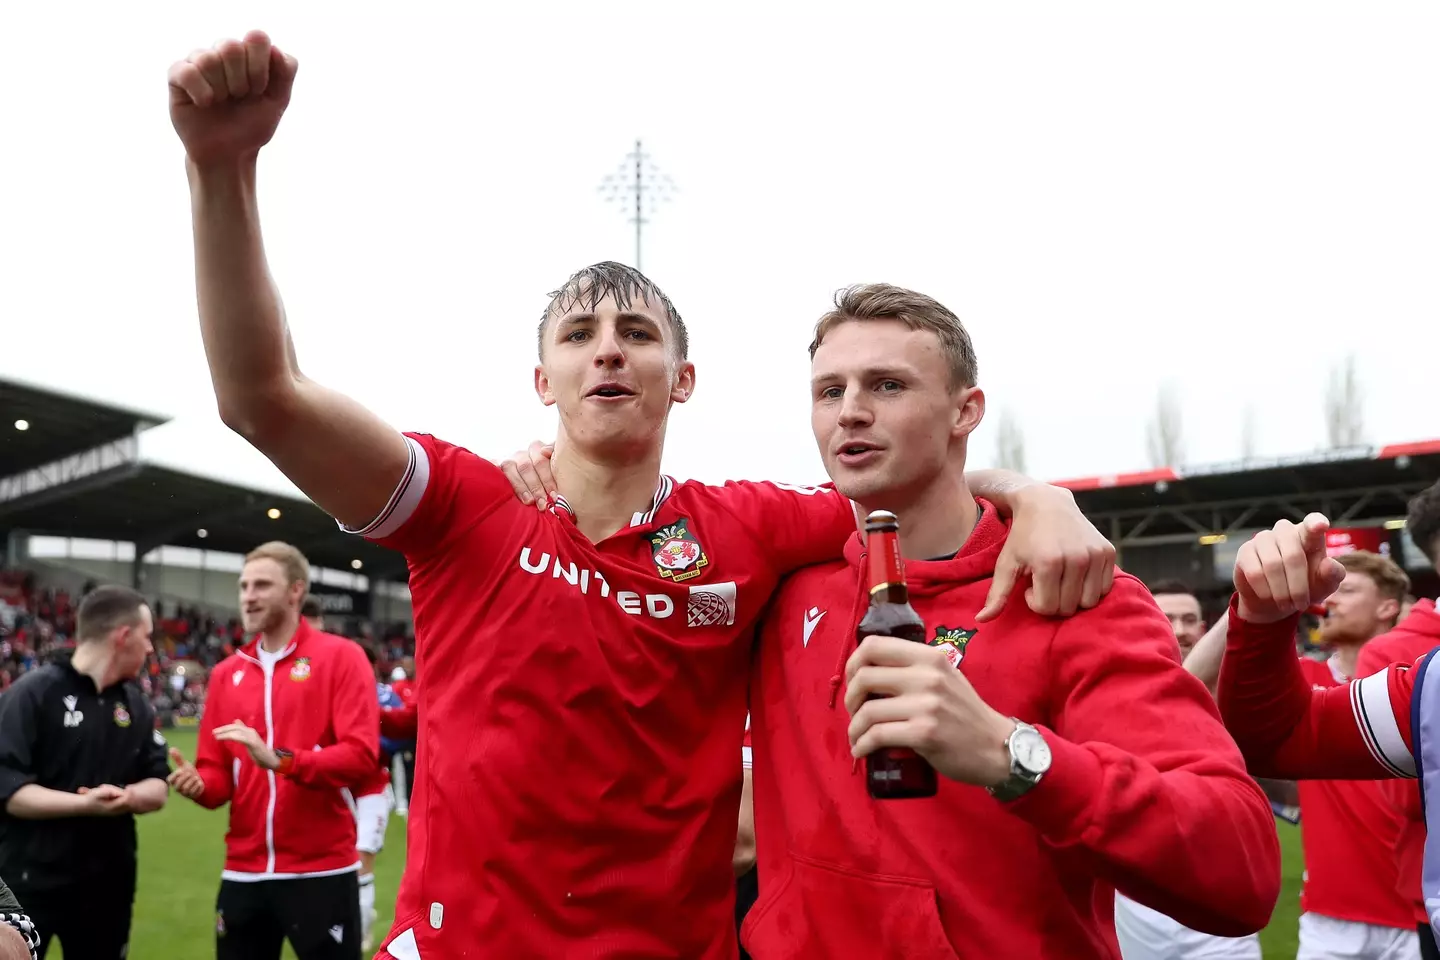 Max Cleworth and Sam Dalby celebrate Wrexham's promotion to League One. Image credit: Getty